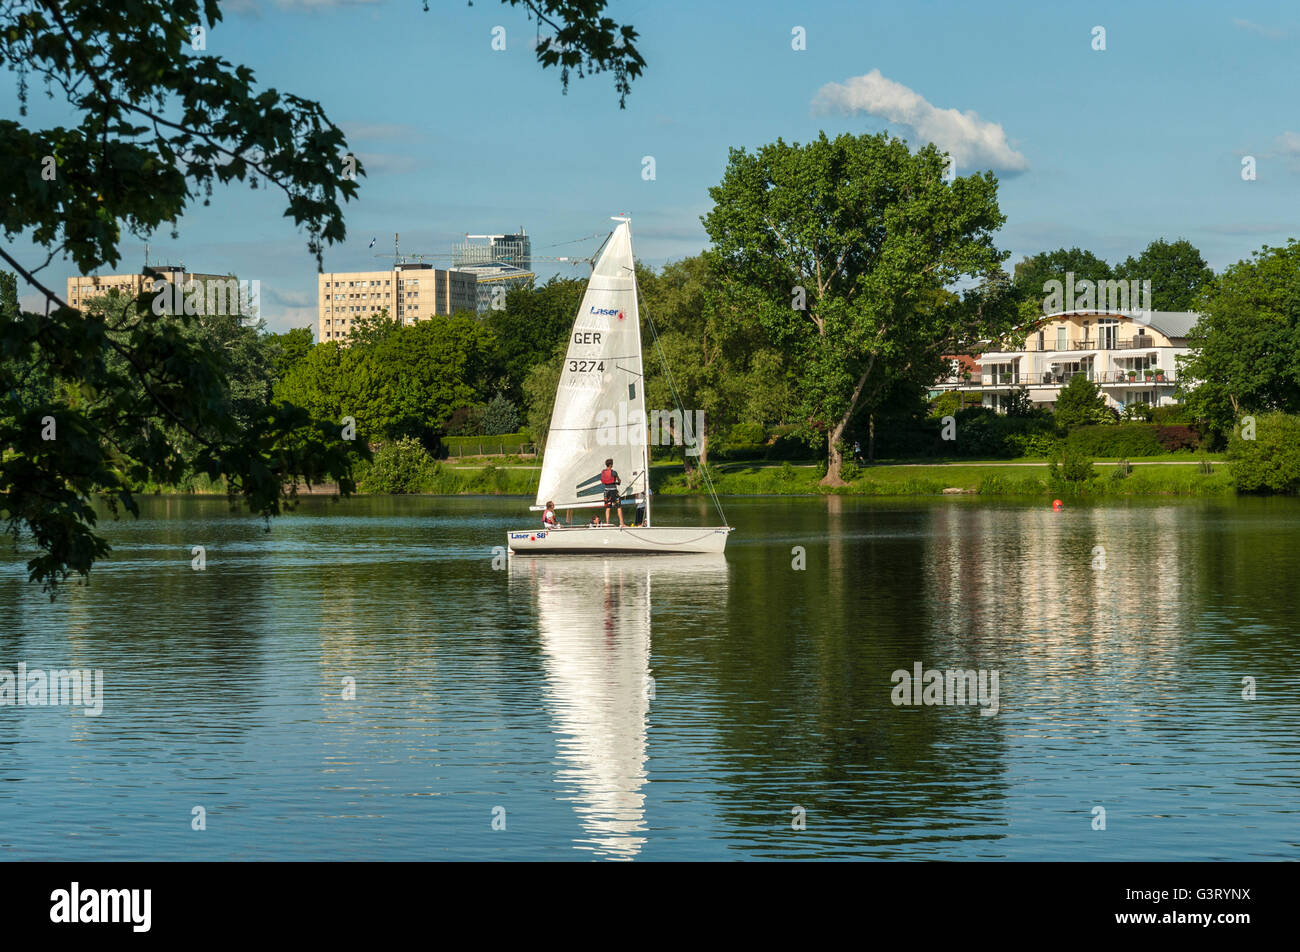 Sailboat on the Aasee in Münster, NRW, Germany. Stock Photo